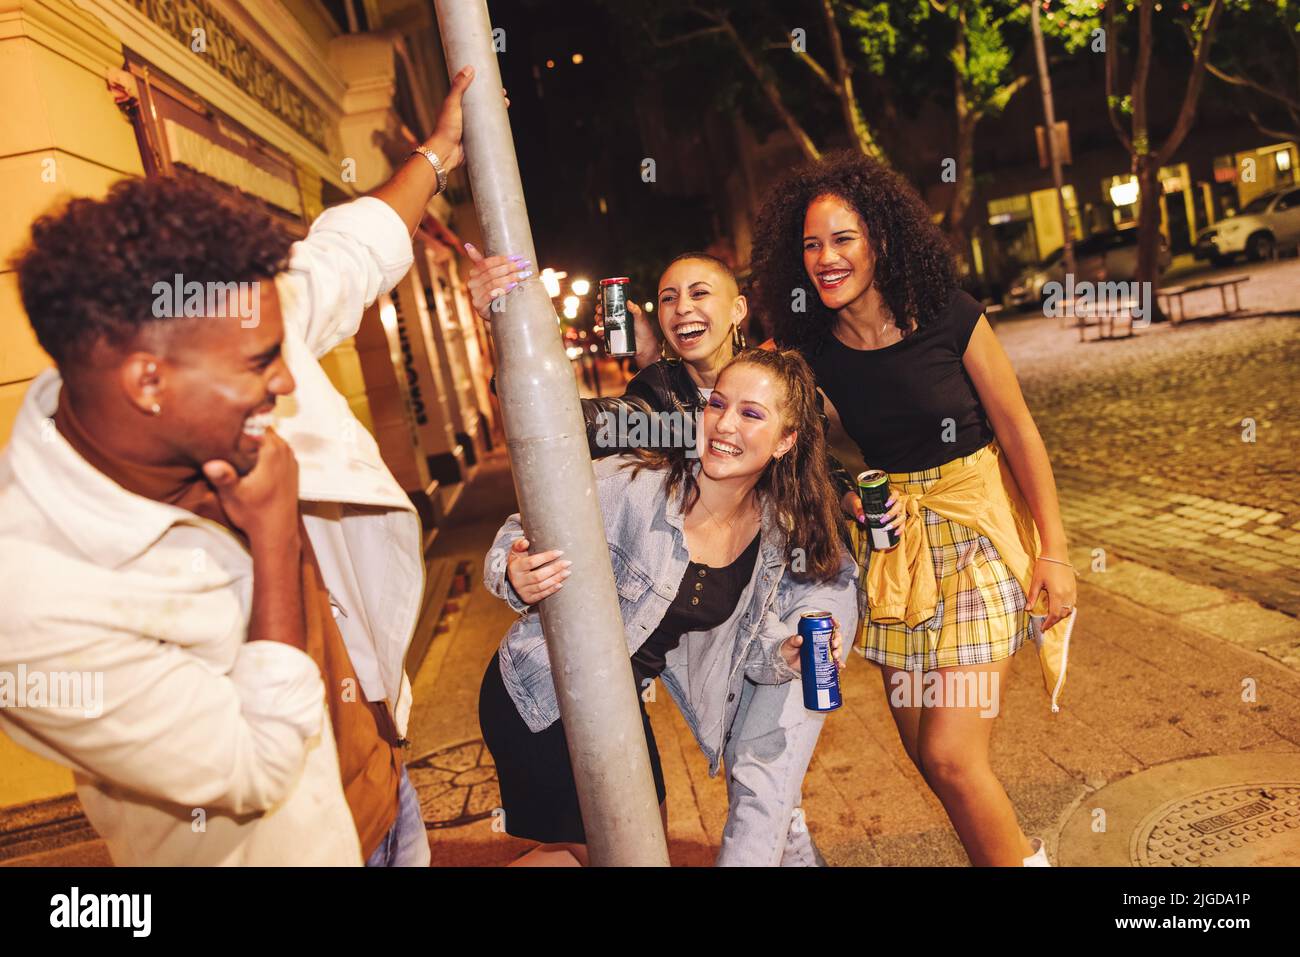 Playful friends having fun in the city at night. Group of carefree young friends laughing happily while standing around a pole. Multicultural young pe Stock Photo